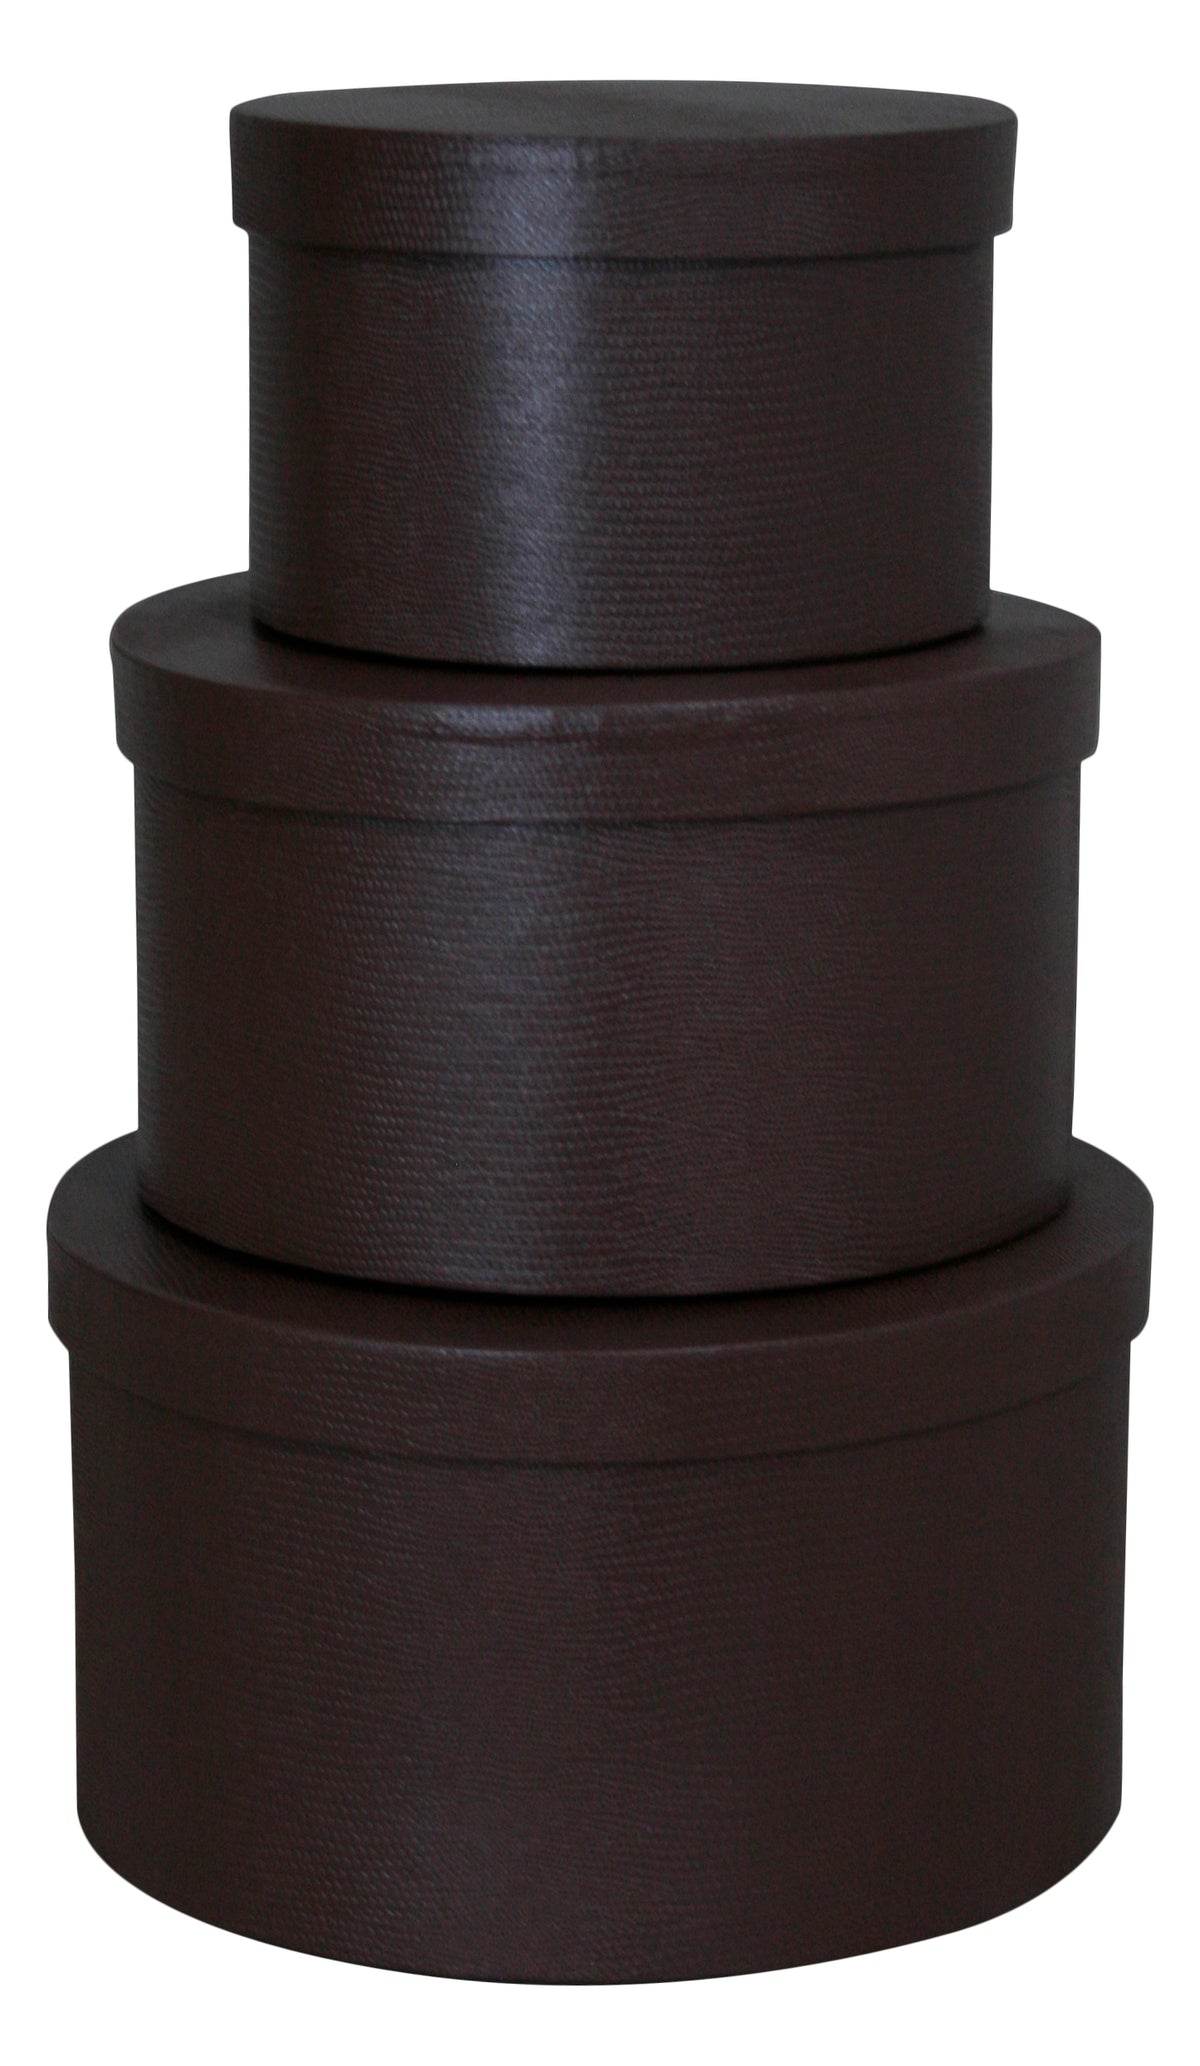 Set of 3 Brown Stacking Boxes w/Lids - 9 PACK